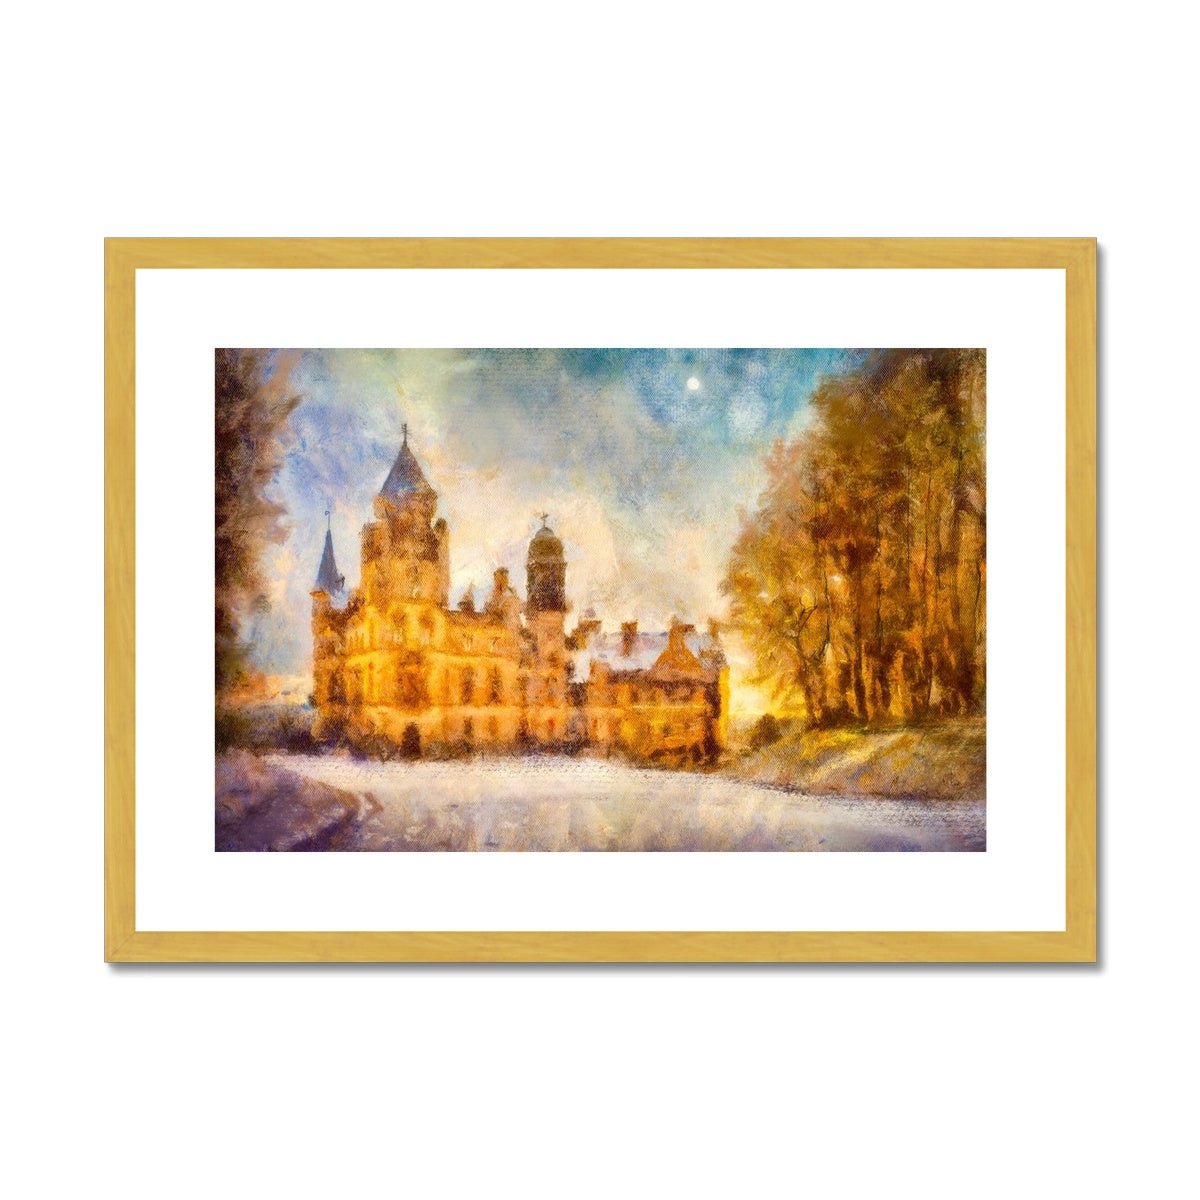 Dunrobin Castle Moonlight Painting | Antique Framed & Mounted Prints From Scotland-Antique Framed & Mounted Prints-Scottish Castles Art Gallery-A2 Landscape-Gold Frame-Paintings, Prints, Homeware, Art Gifts From Scotland By Scottish Artist Kevin Hunter